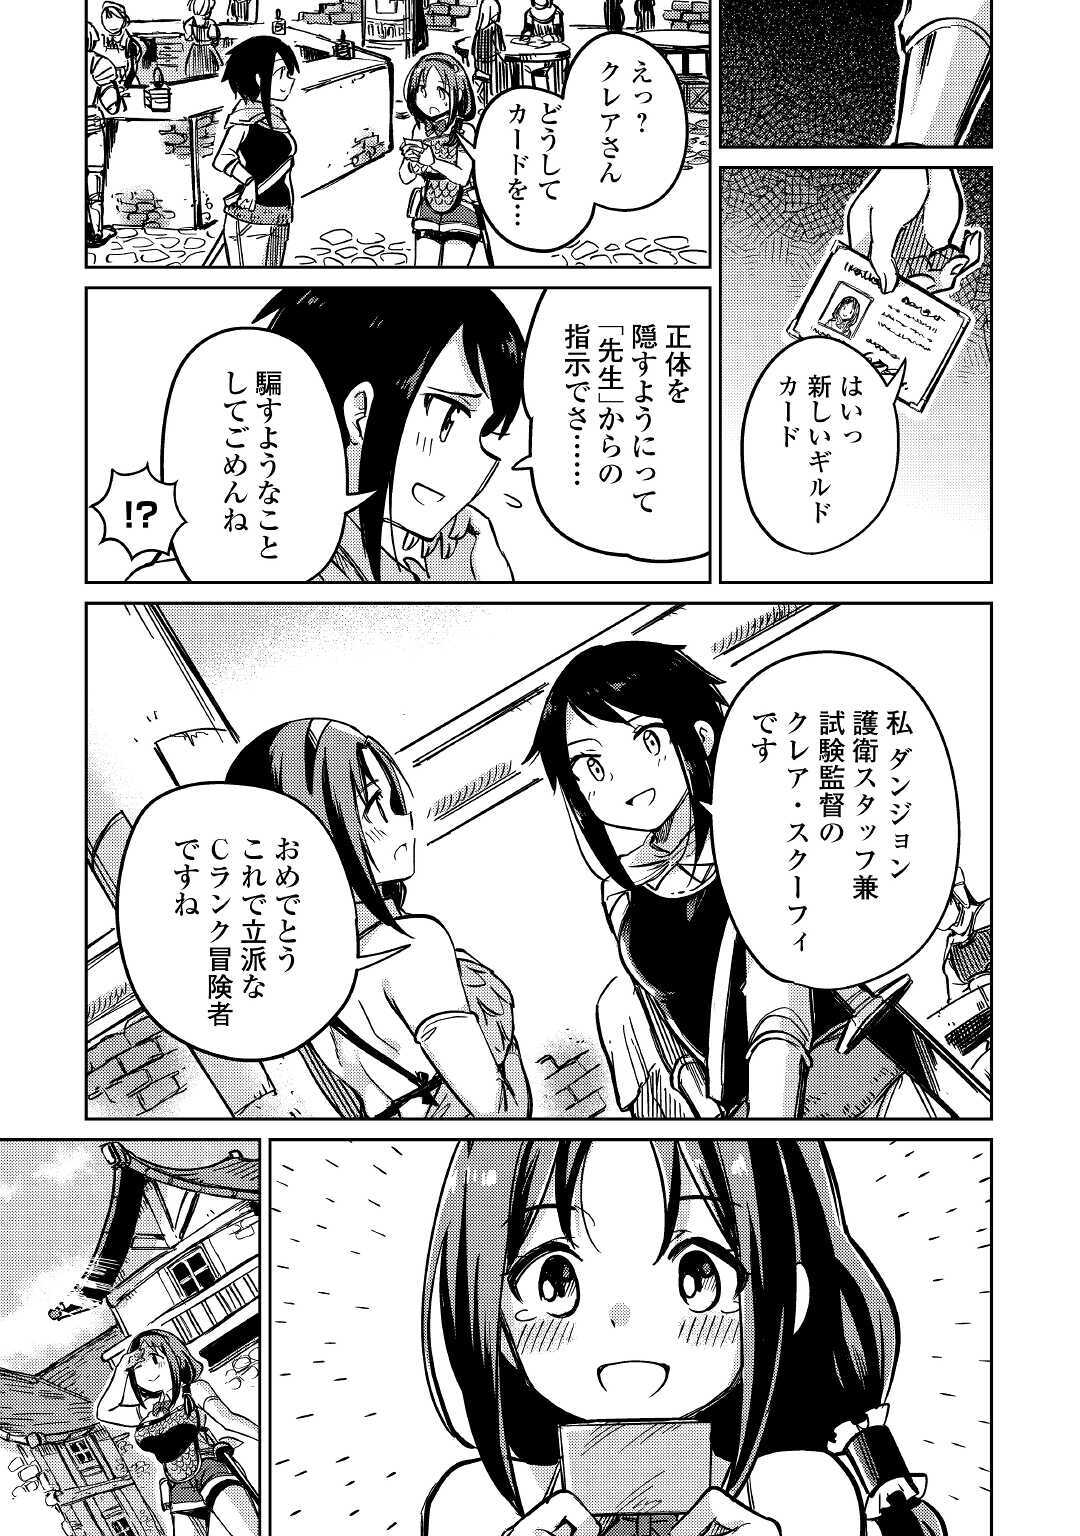 The Former Structural Researcher’s Story of Otherworldly Adventure 第26話 - Page 23